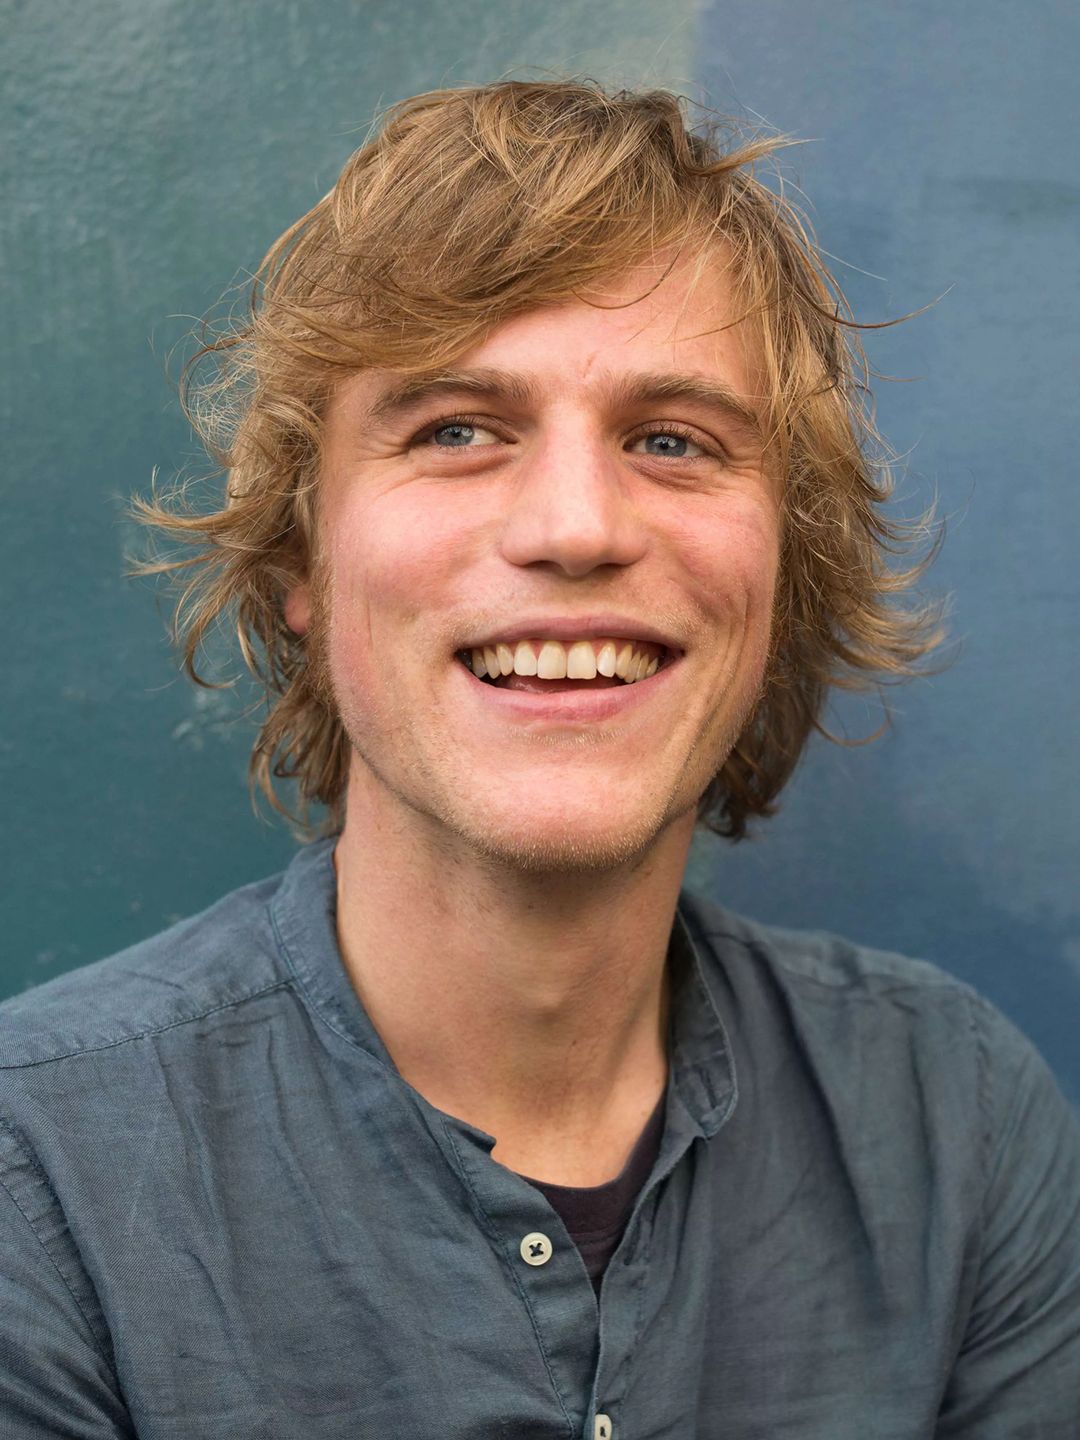 Johnny Flynn does he have kids